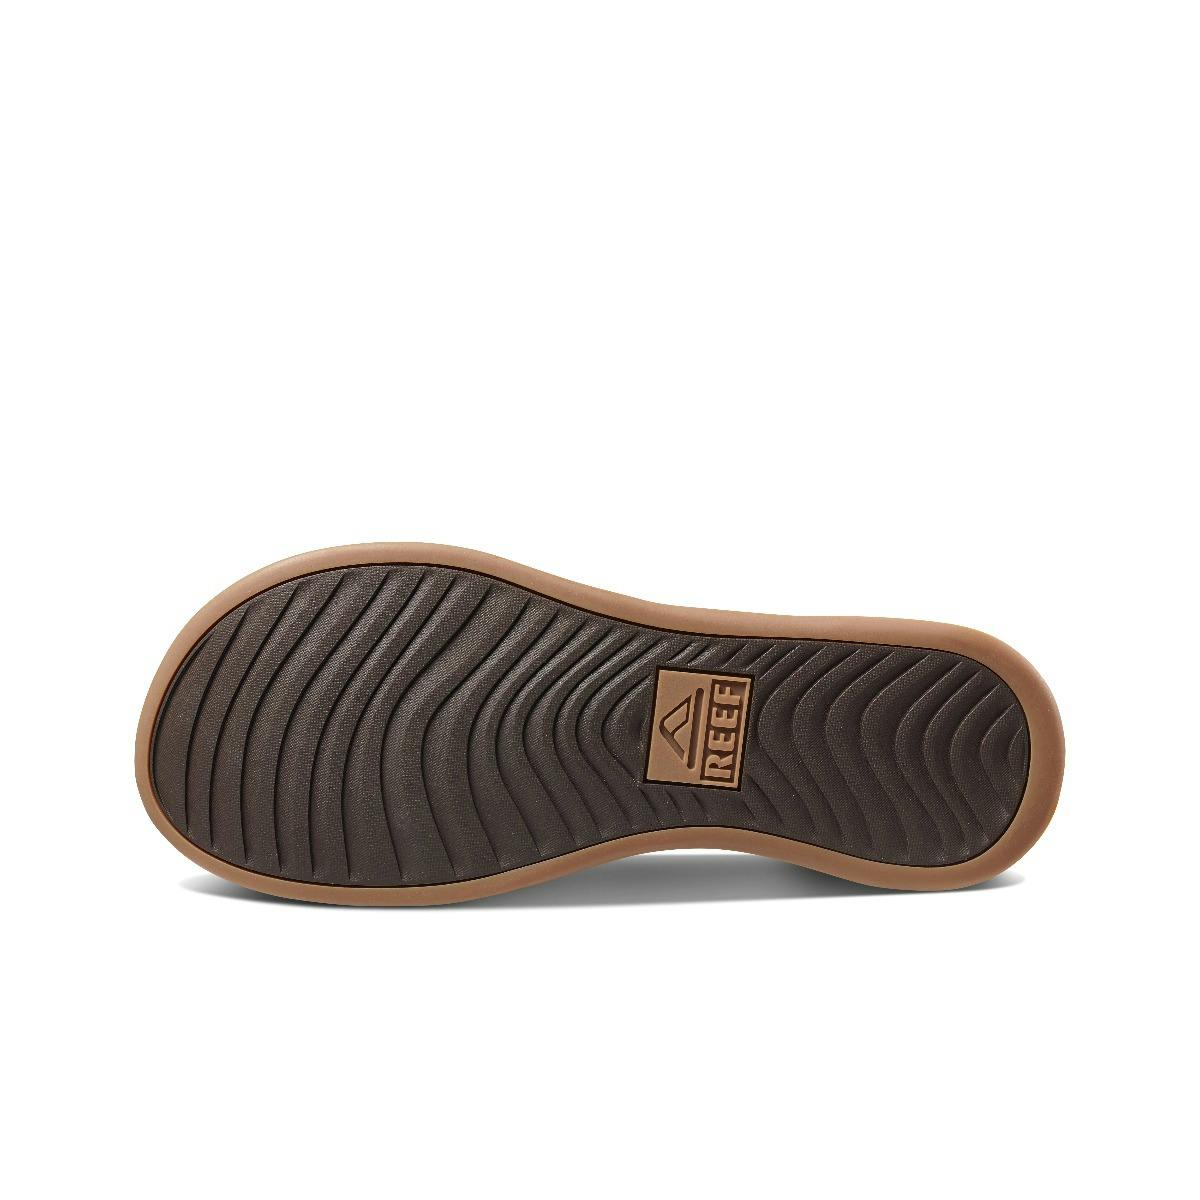 Reef Cushion Bounce Lux Sandals (Men's) Sole - Toffee